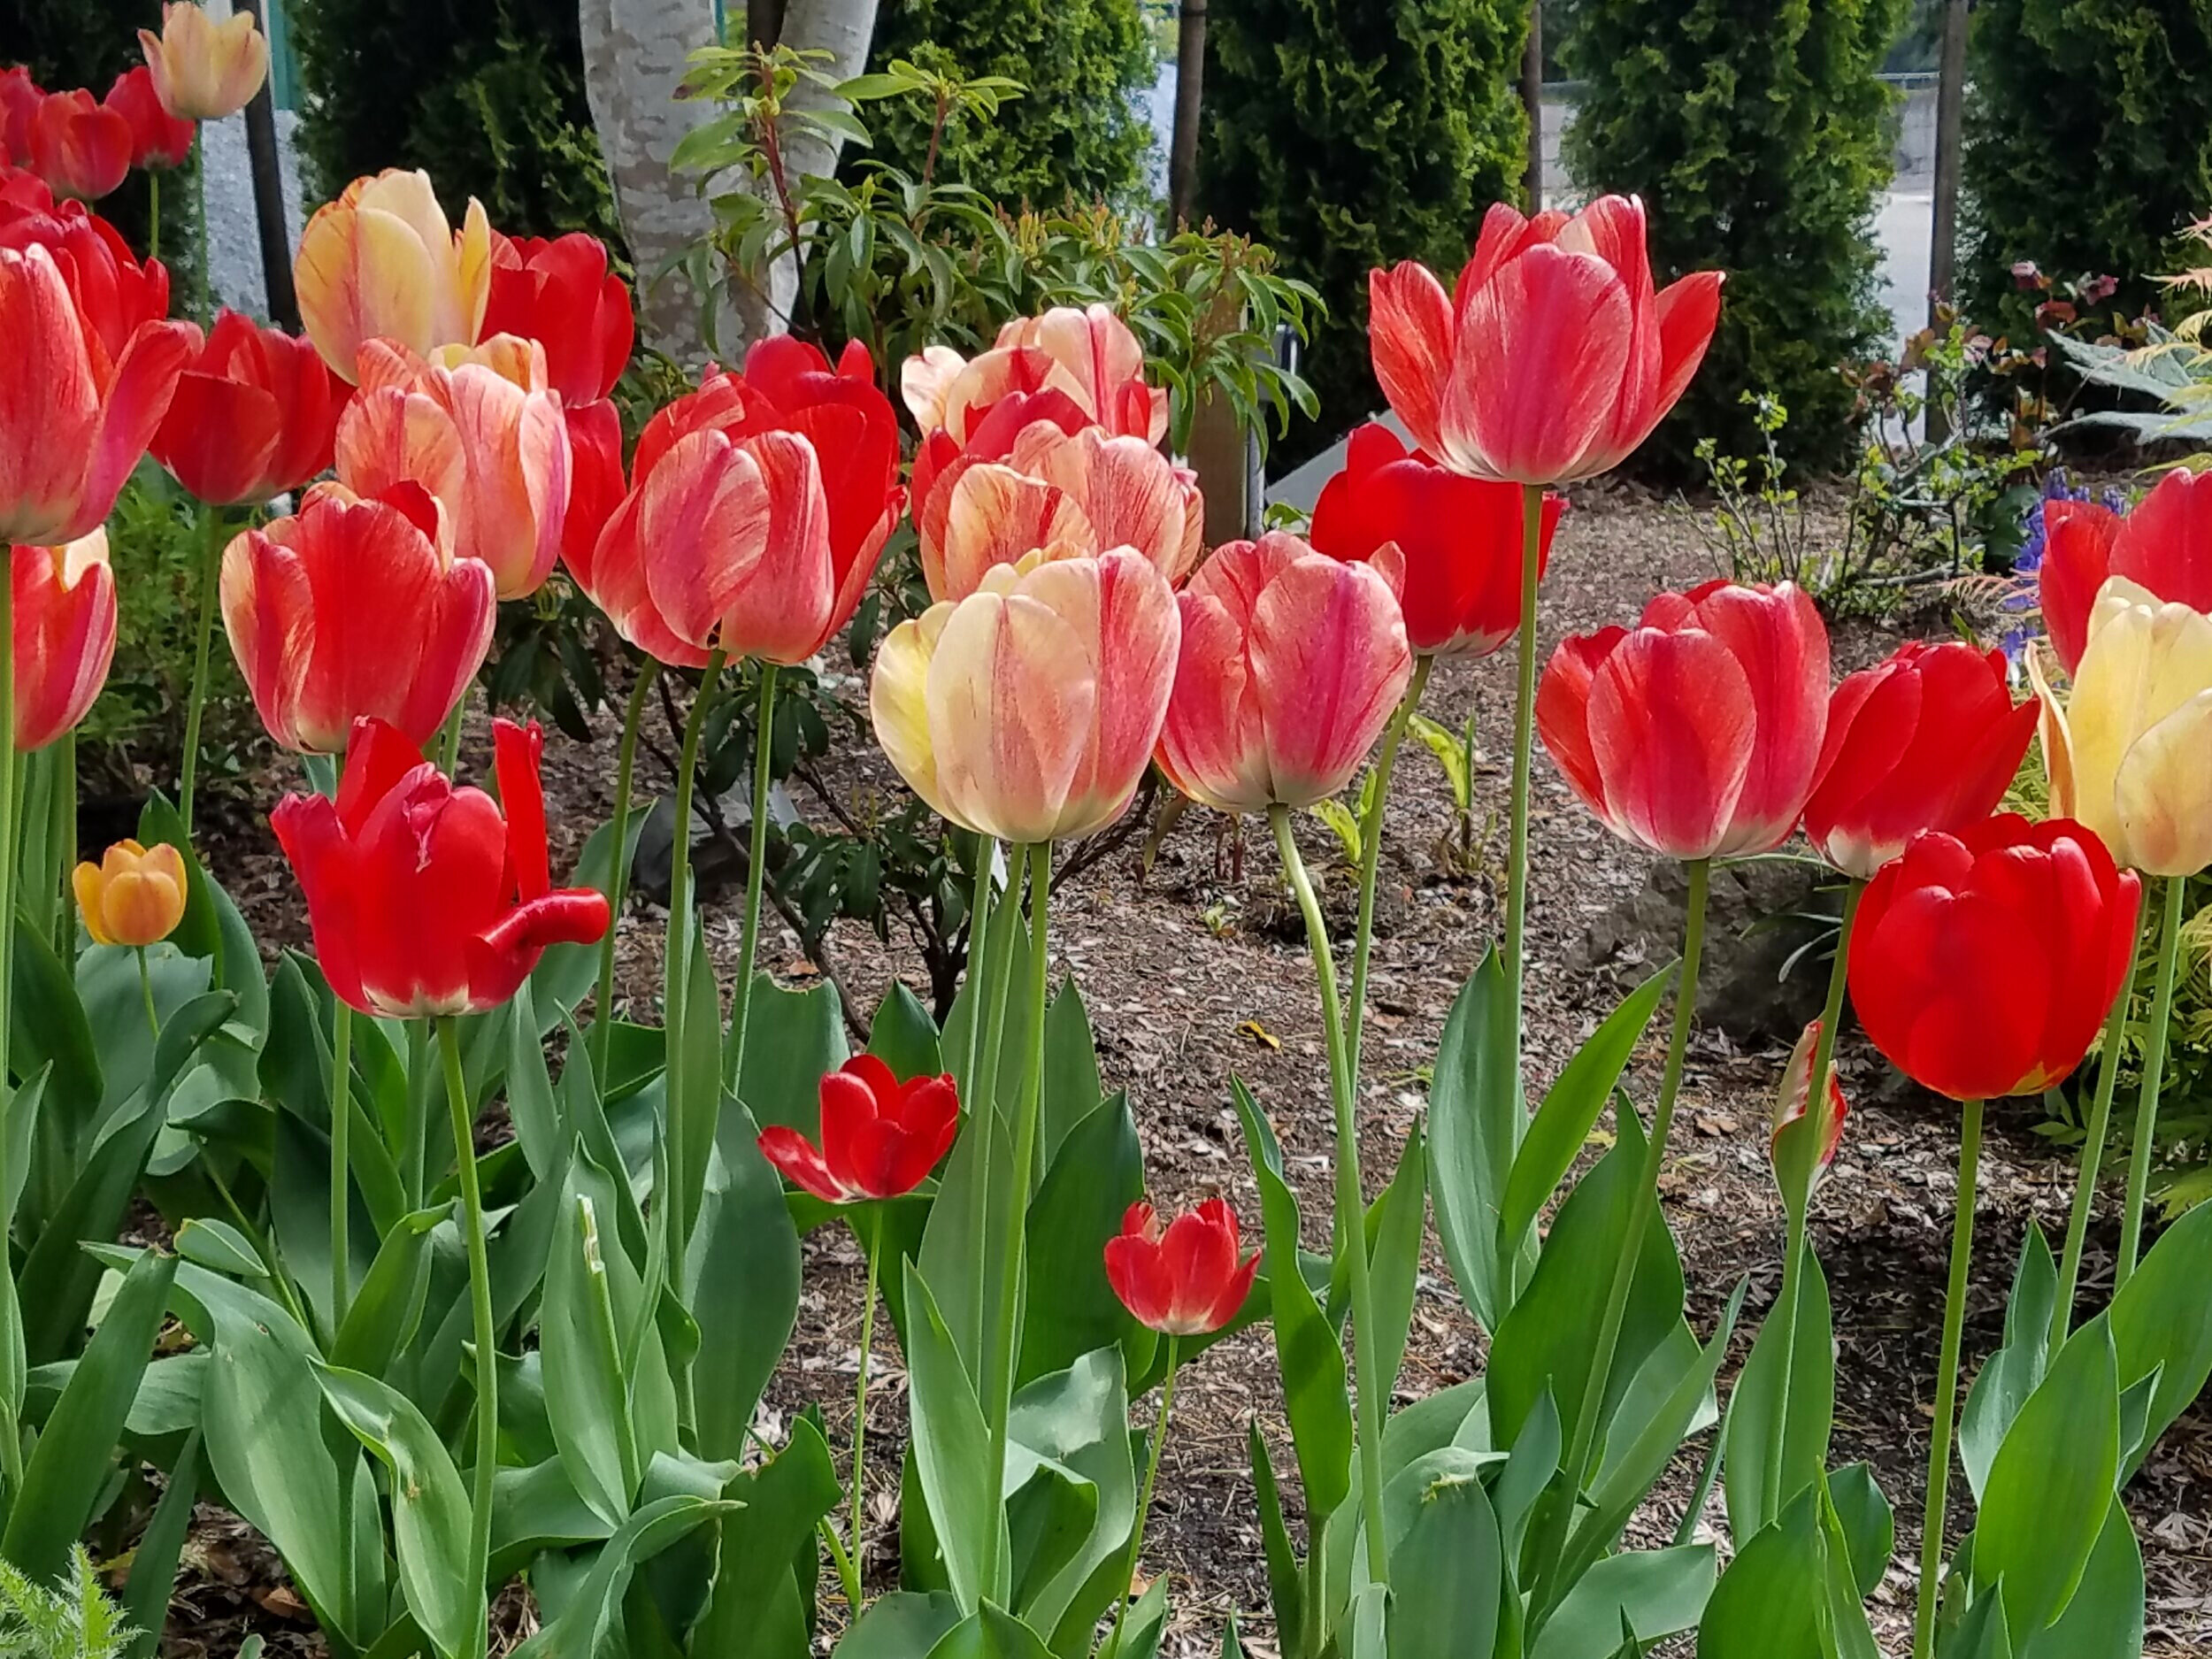  Tulip 'Gudoshnik' is a Giant Darwin Hybrid that stands almost 24 inches tall, and blooms in April for three to four weeks. 